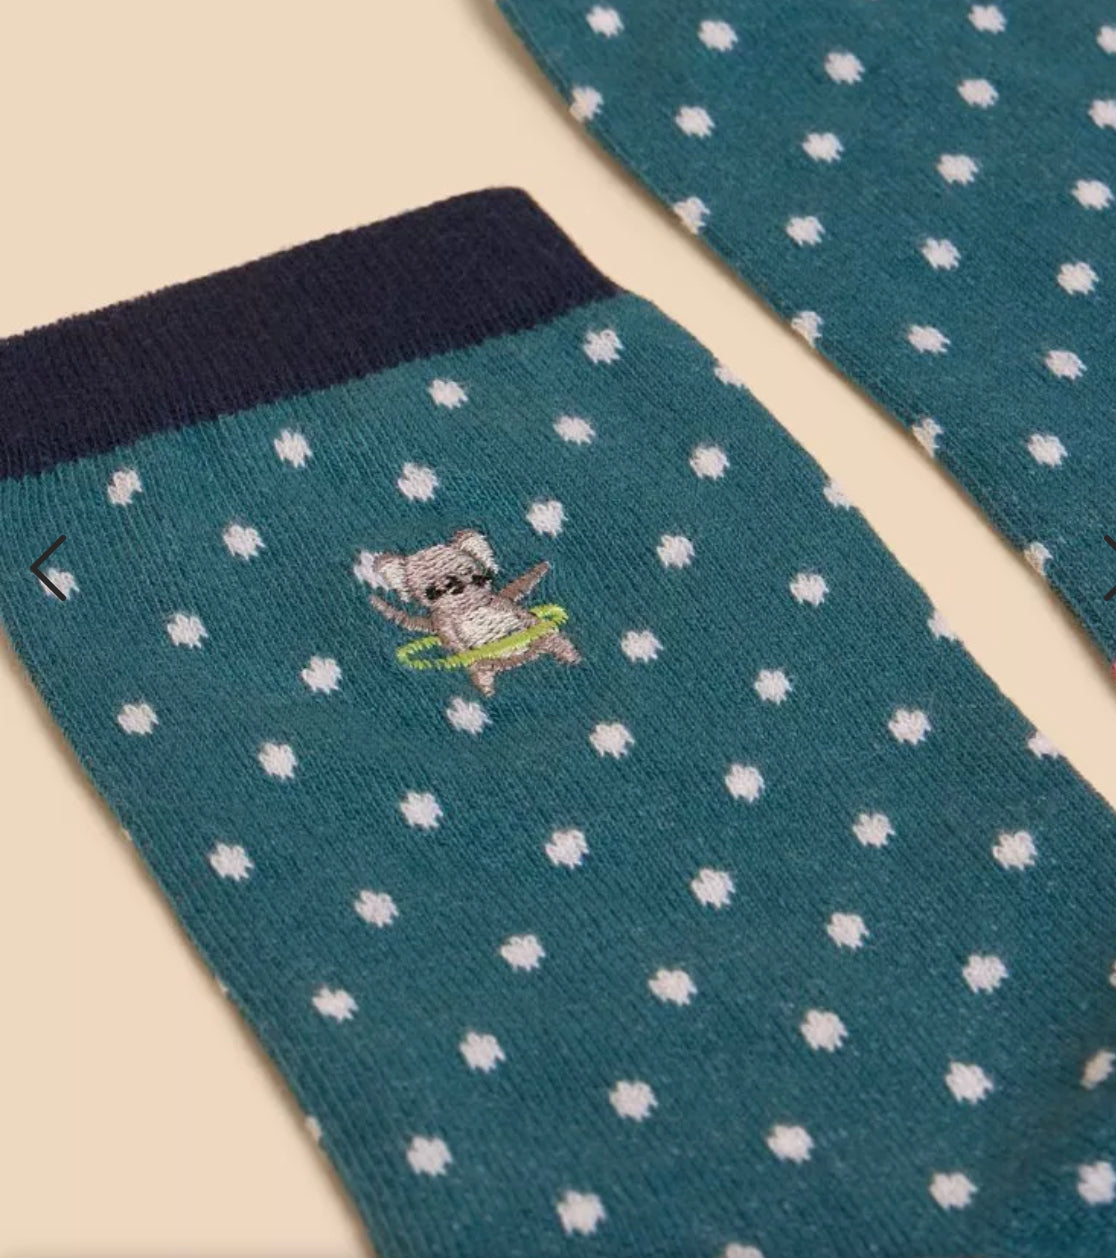 EMBROIDERED KOALA ANKLE SOCK  IN TEAL MULTI